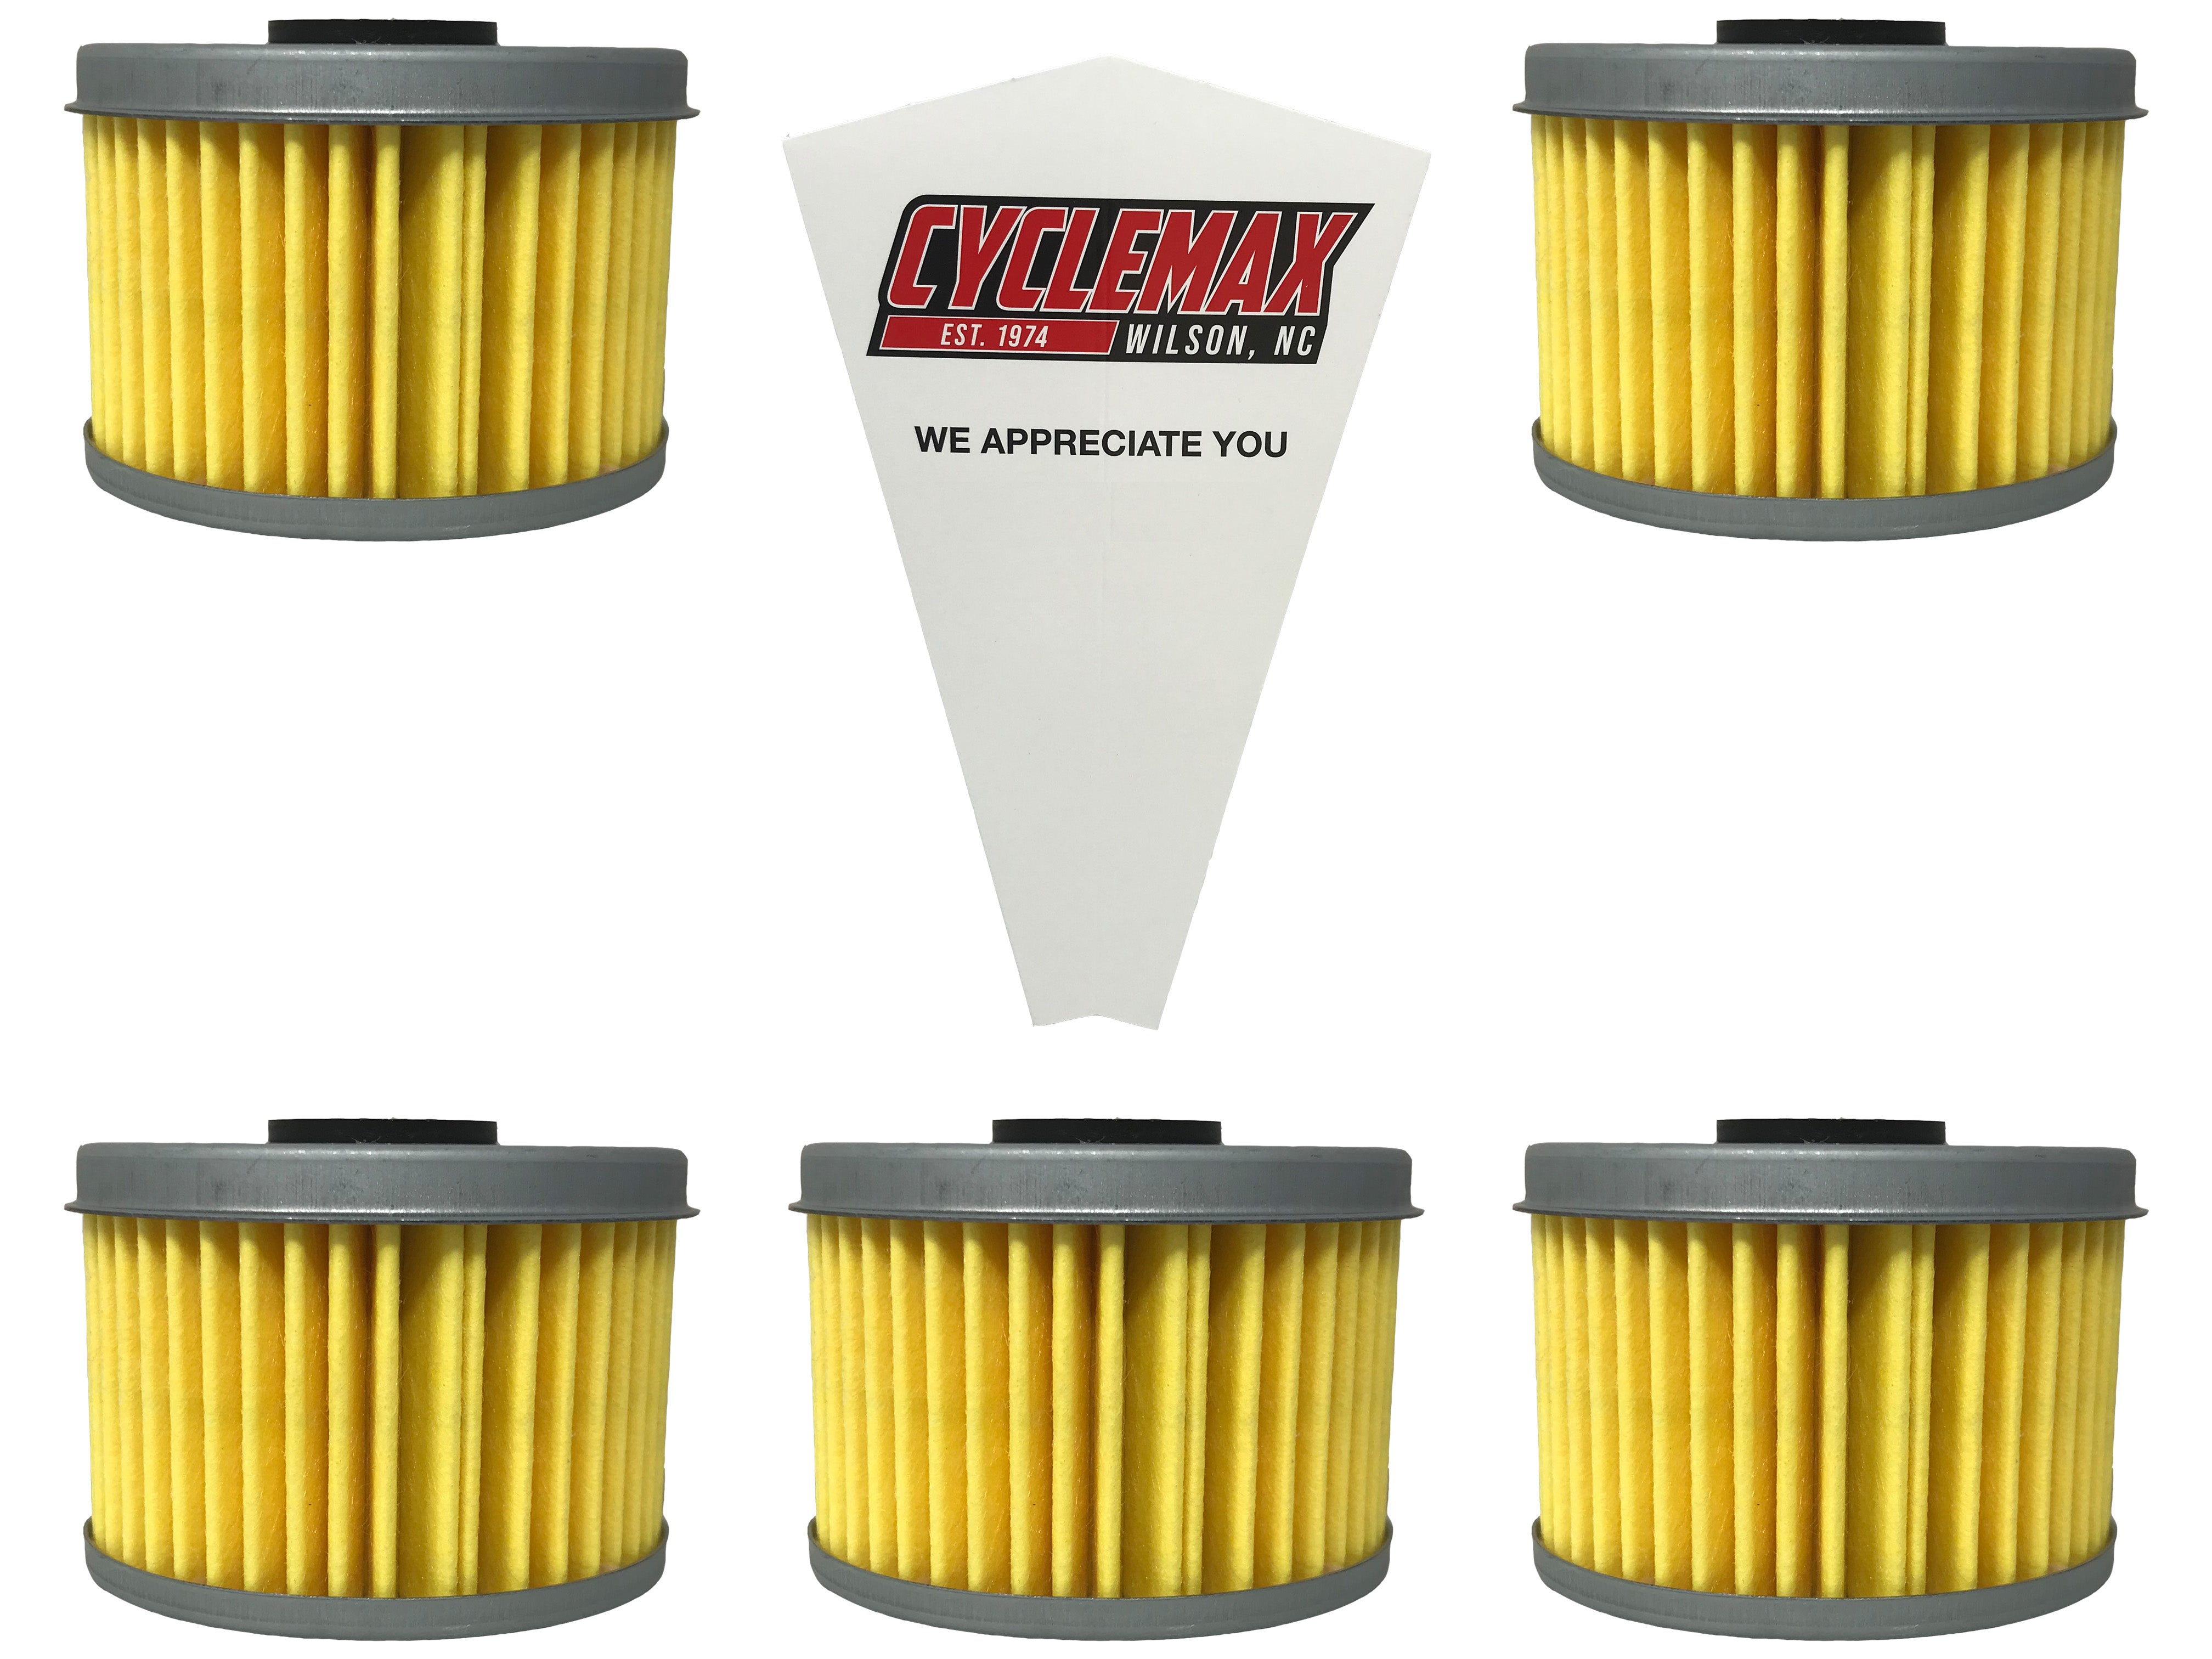 Cyclemax Five Pack for Honda Oil Filter 15412-HM5-A10 Contains Five Filters and a Funnel